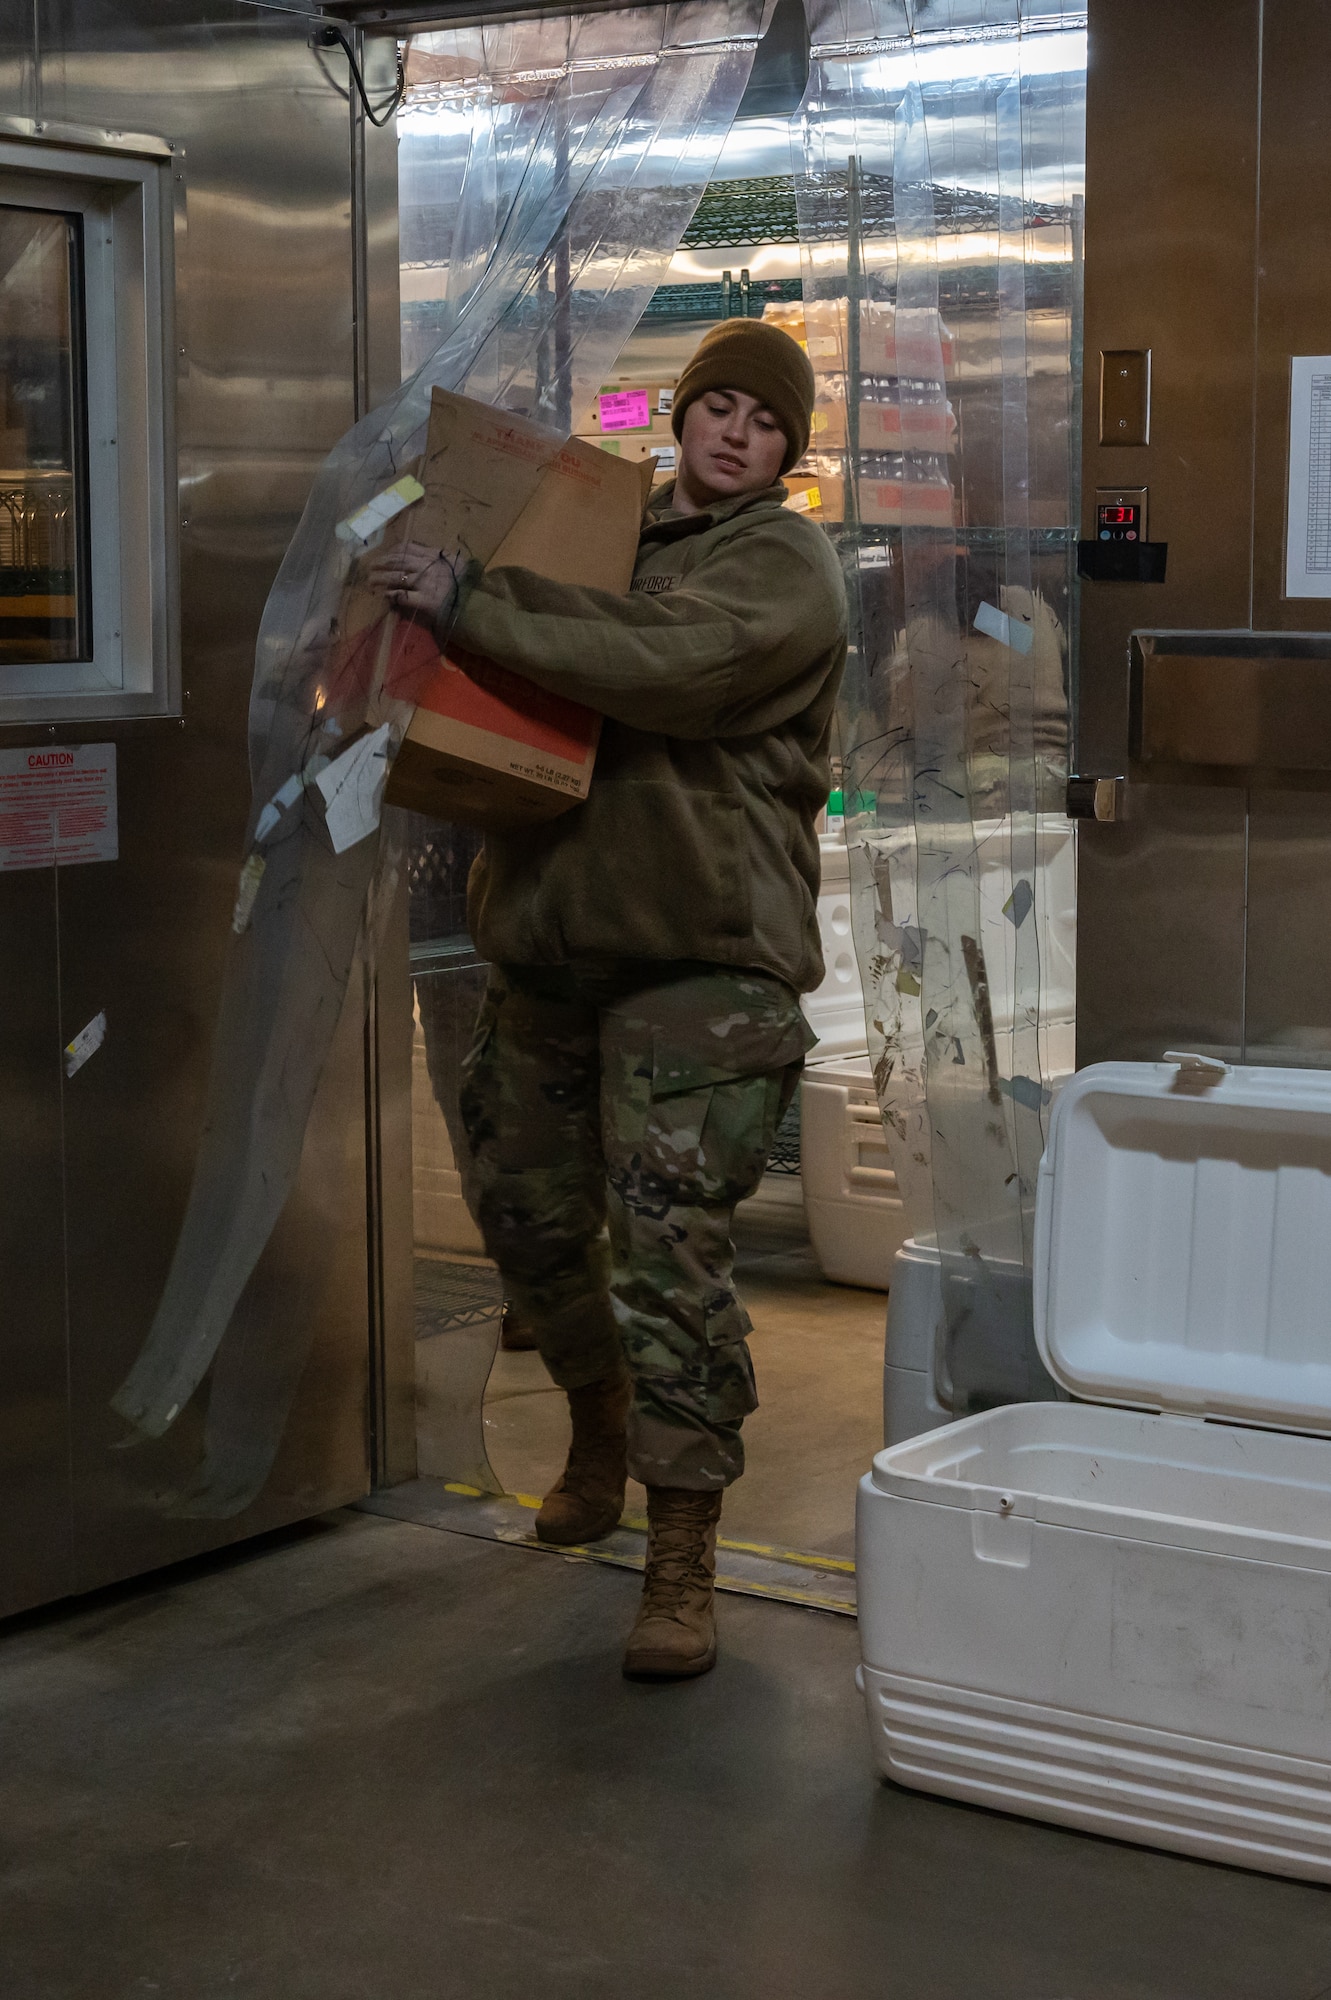 U.S. Airmen from the 5th Force Support Squadron pack supplies for use by chefs deployed to remote Missile Alert Facilities (MAFs) at Minot Air Force Base, North Dakota, Jan. 30, 2023.Airmen not deployed to a MAF pack rations to be delivered quickly to the missile sites around Minot, some sites reaching up to 75 miles away. (U.S. Air Force photo by Airman 1st Class Alexander Nottingham)